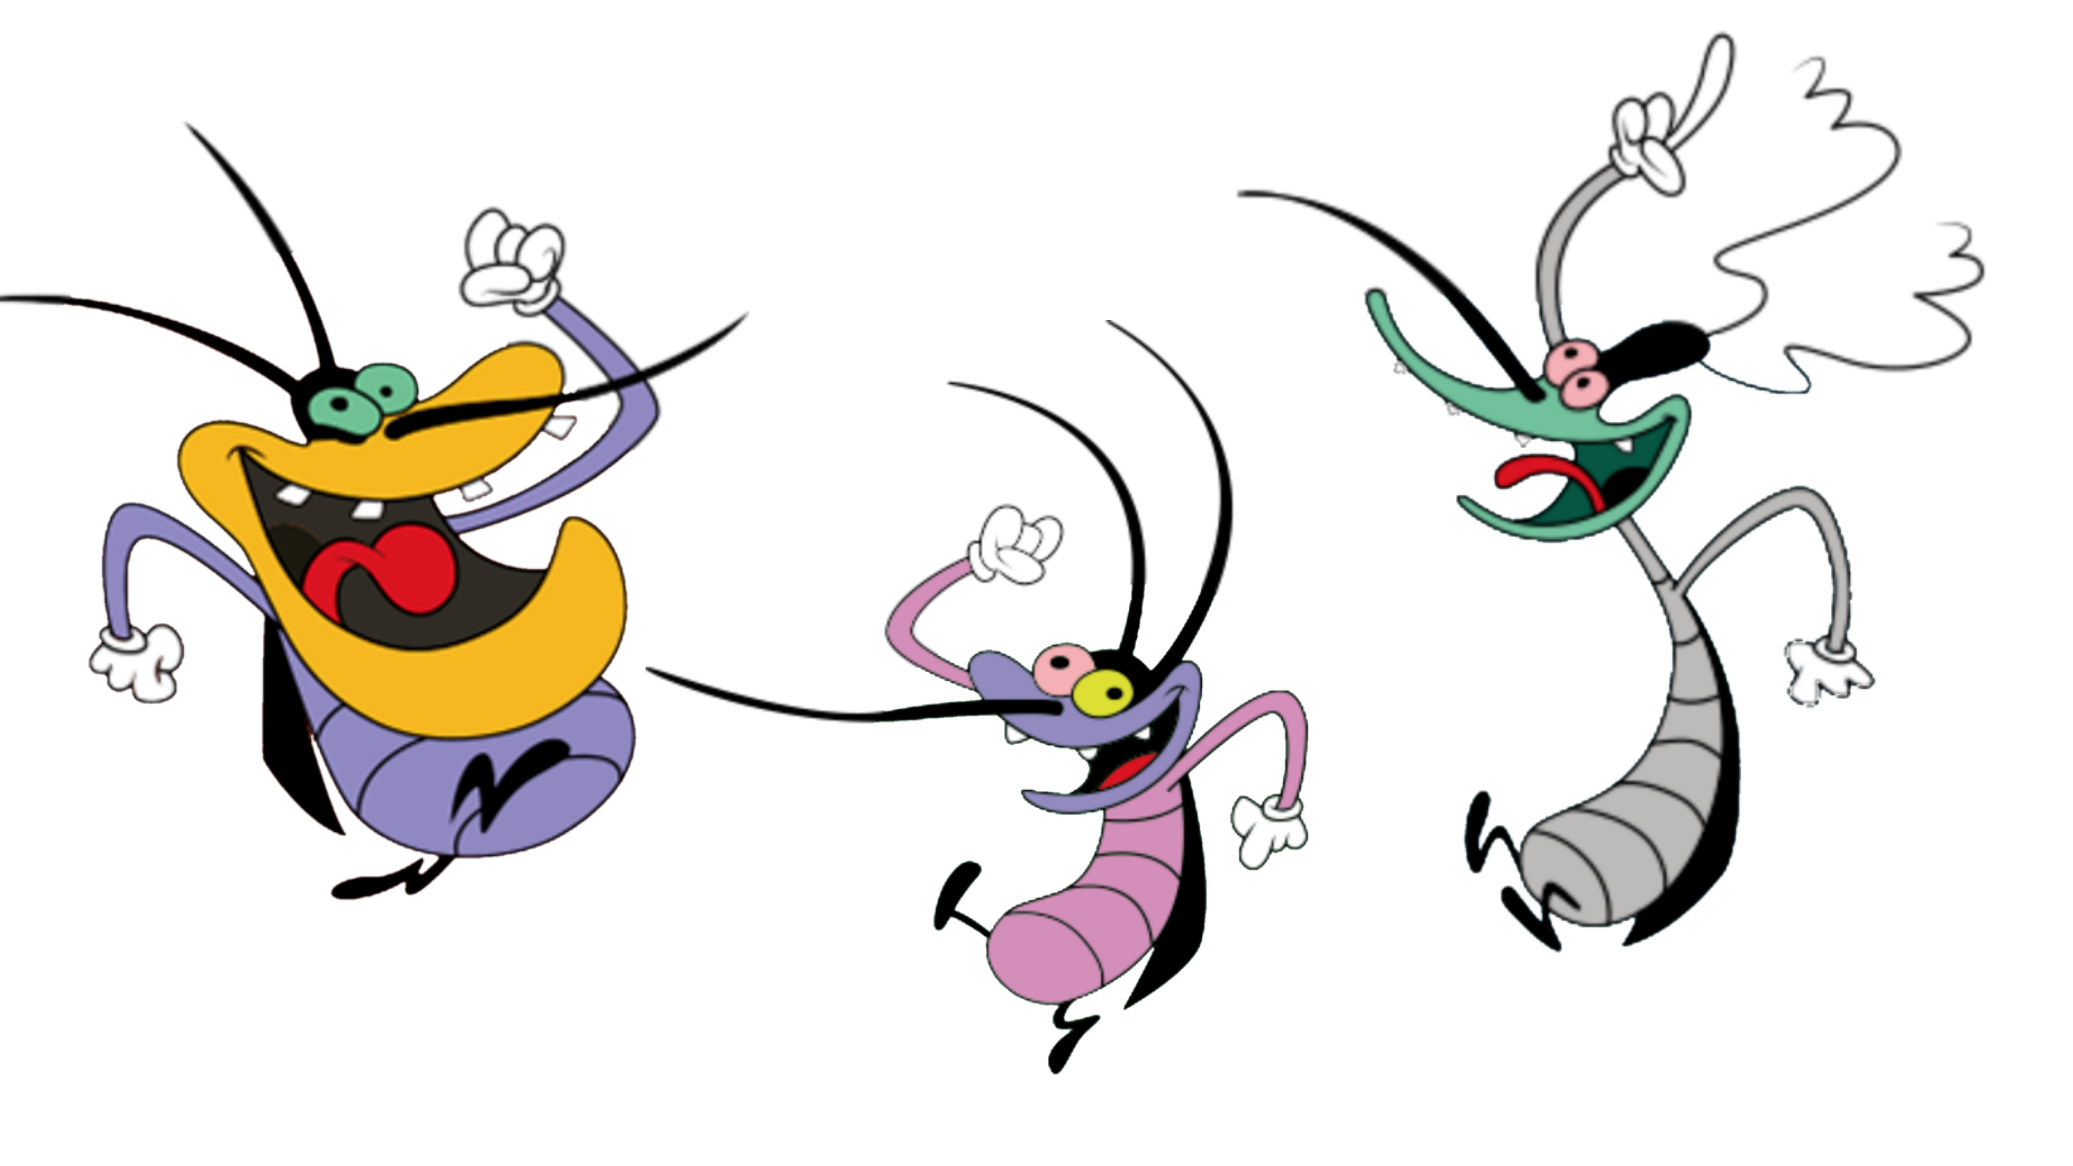 oggy and the cockroaches cartoons